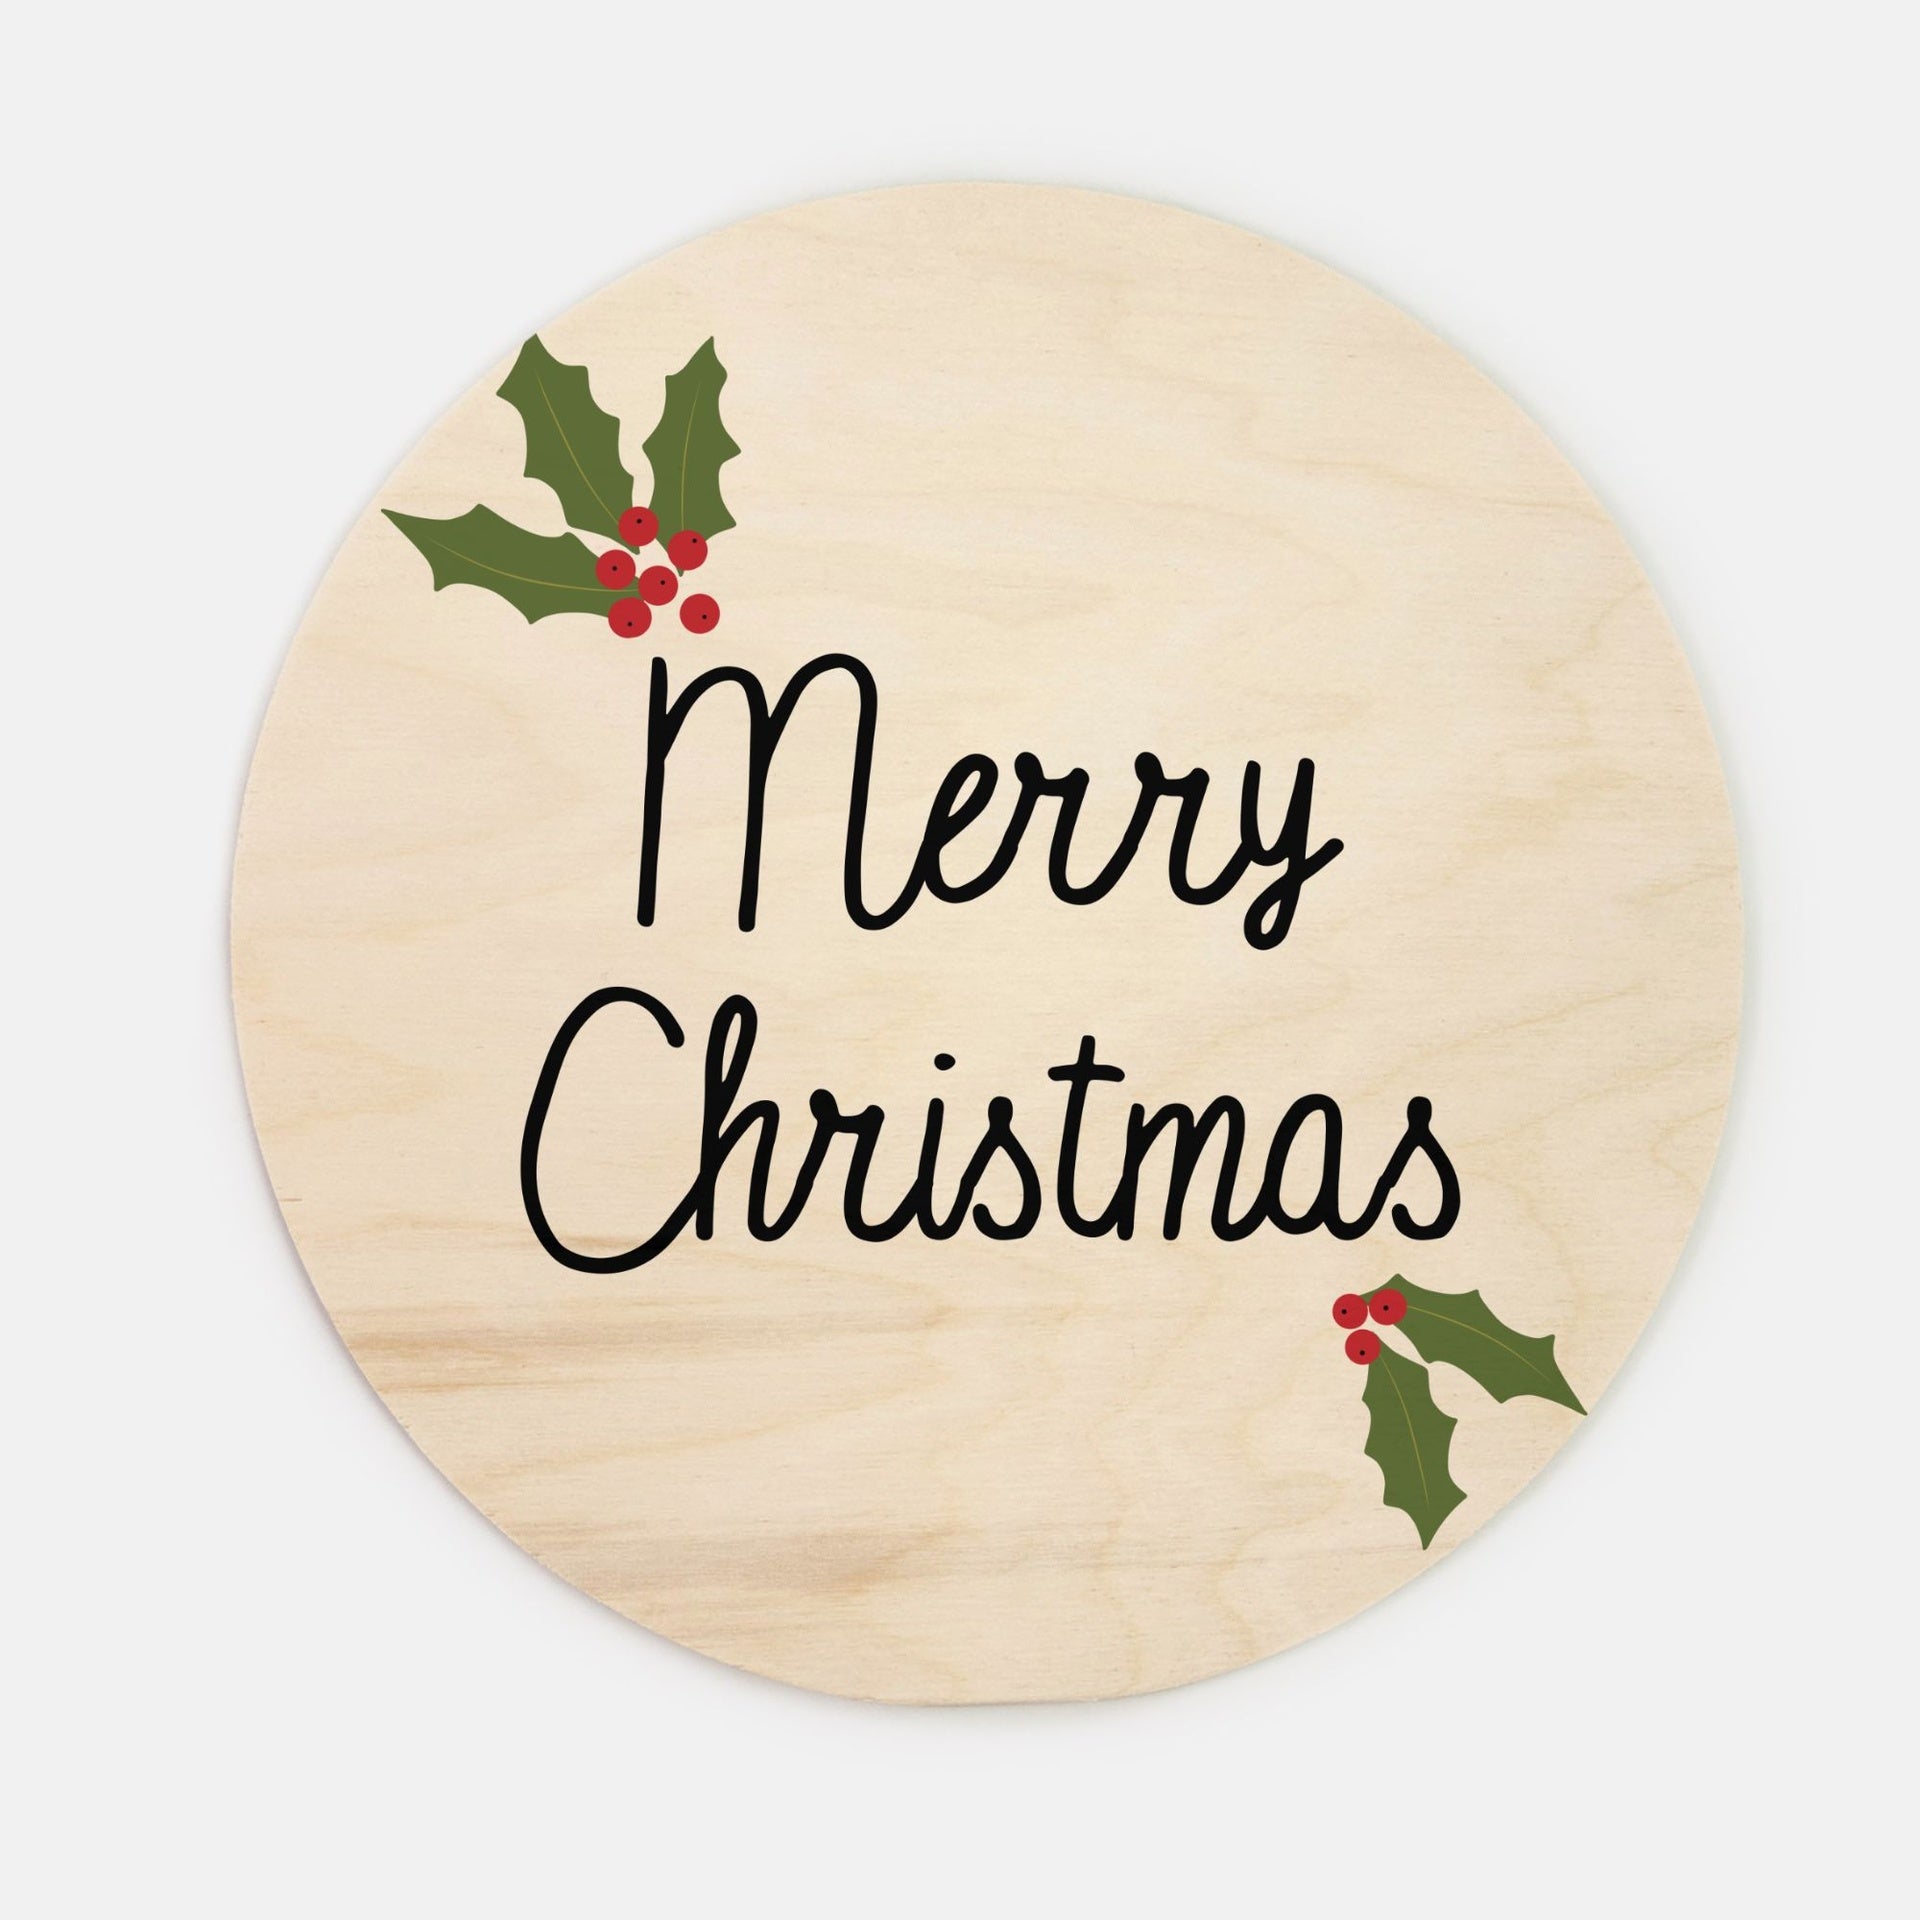 10" Round Wood Sign - Merry Christmas Holly